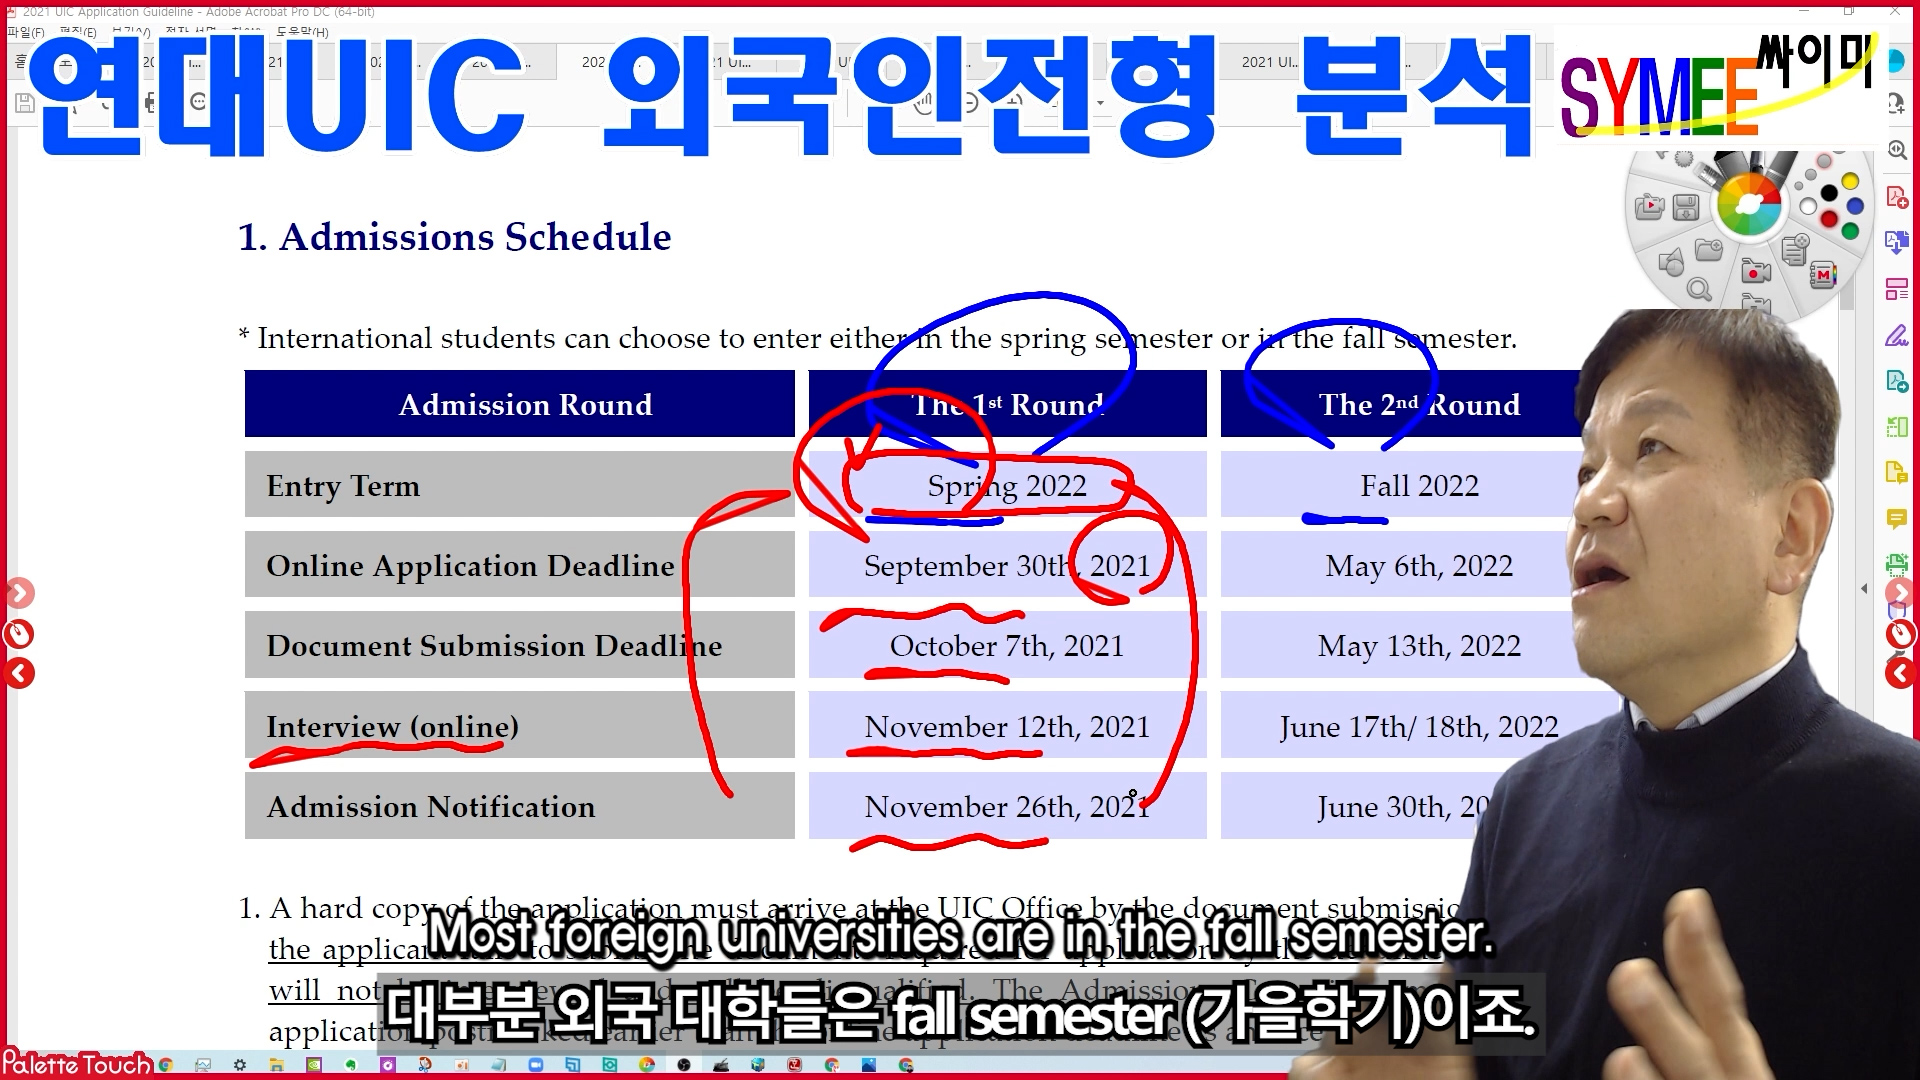 Yonsei Univ. Admission for UIC for Foreign Student 03 Admission Procedure.00_01_04_20.스틸 003.jpg